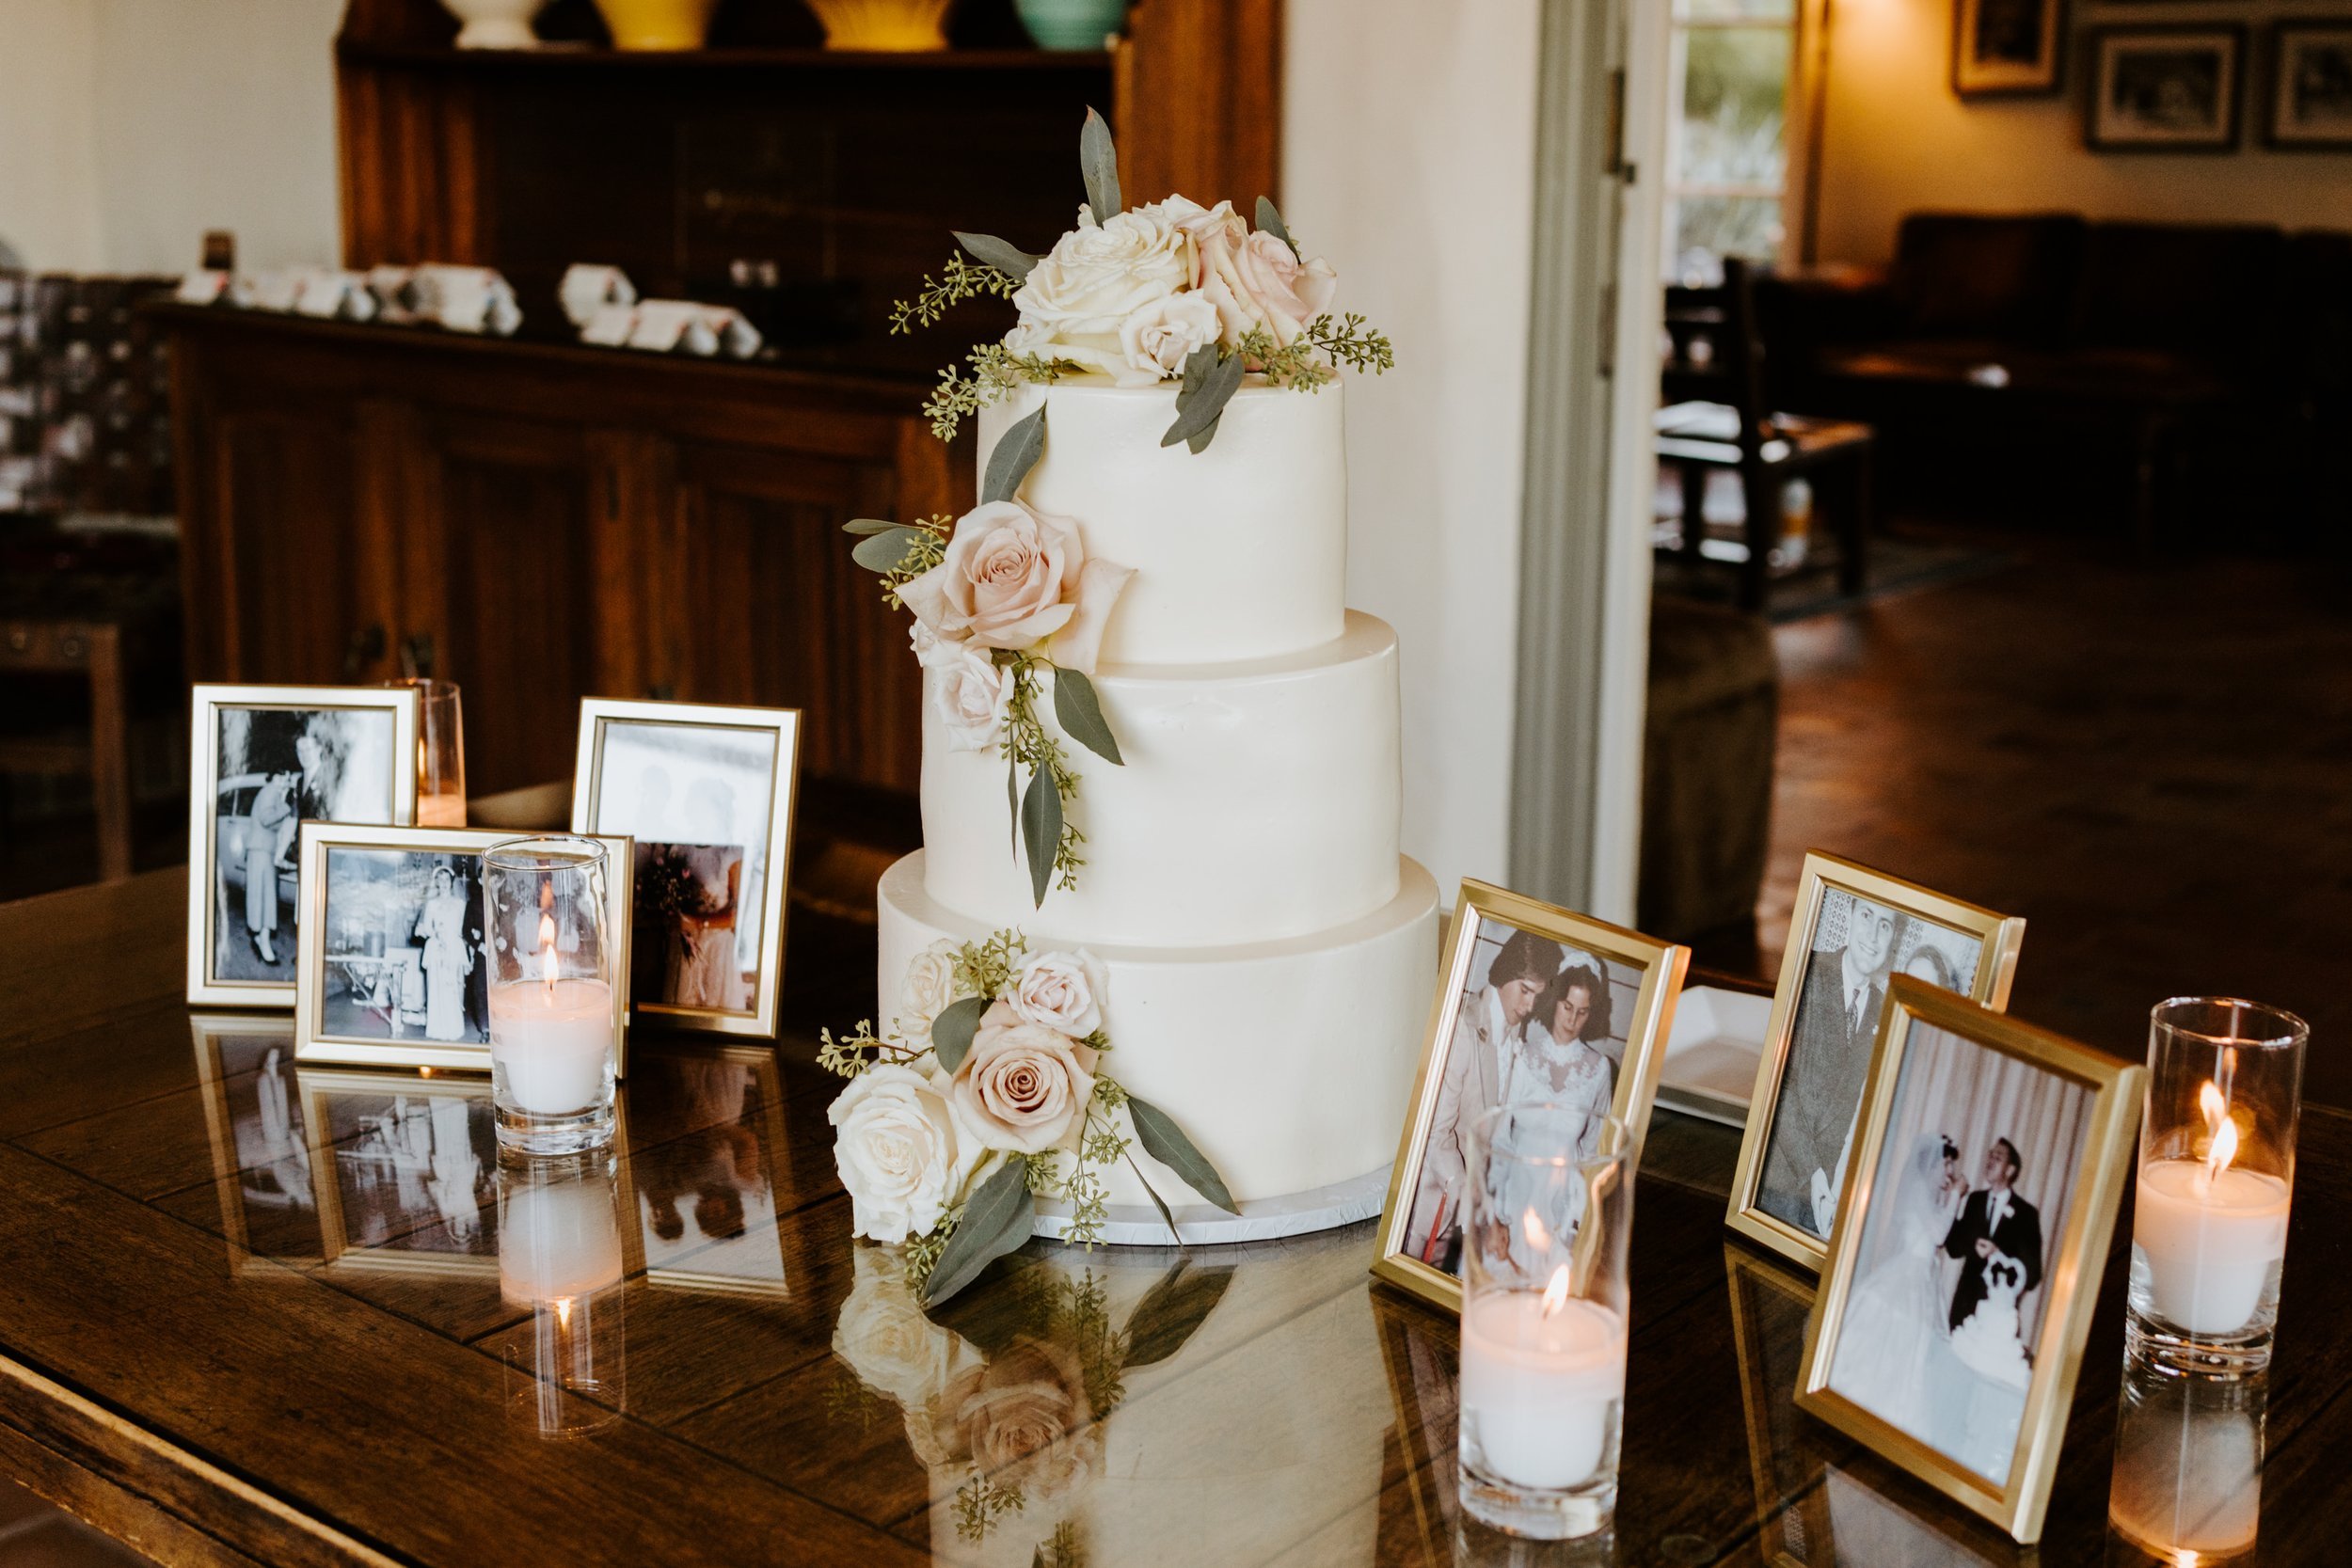 Elegant and simple white wedding cake with flowers and ancestry table at wedding, The O’Donnell House Palm Springs, Tida Svy Photography